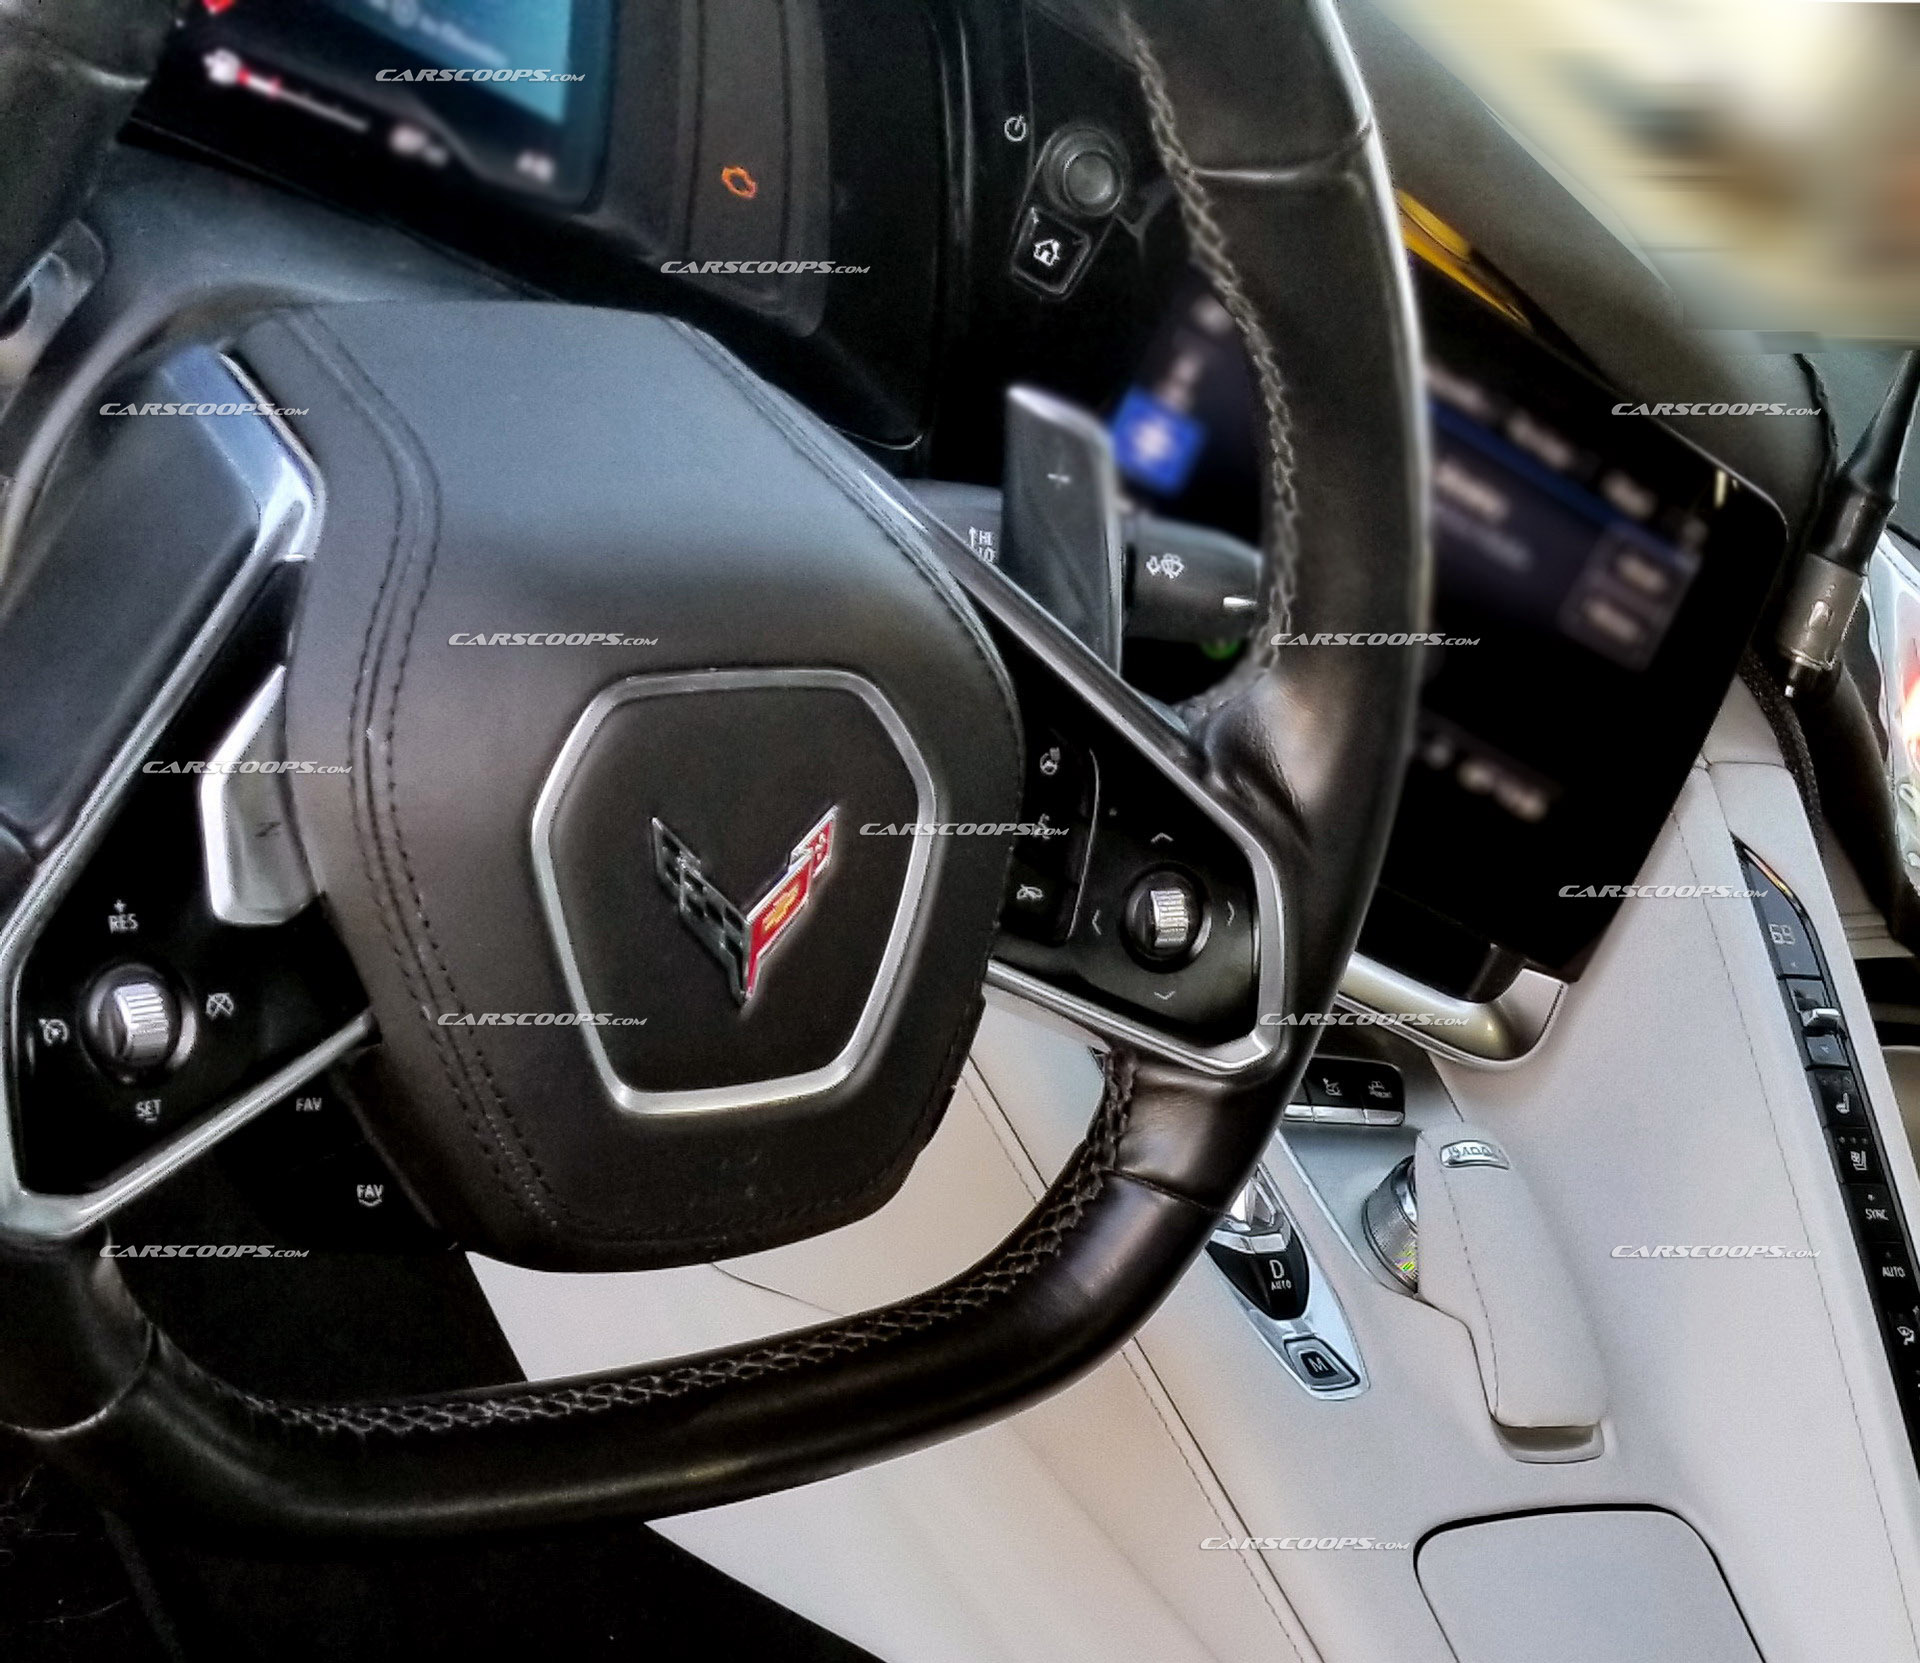 Exclusive Look At 2020 Corvette C8 S Dash From Behind The